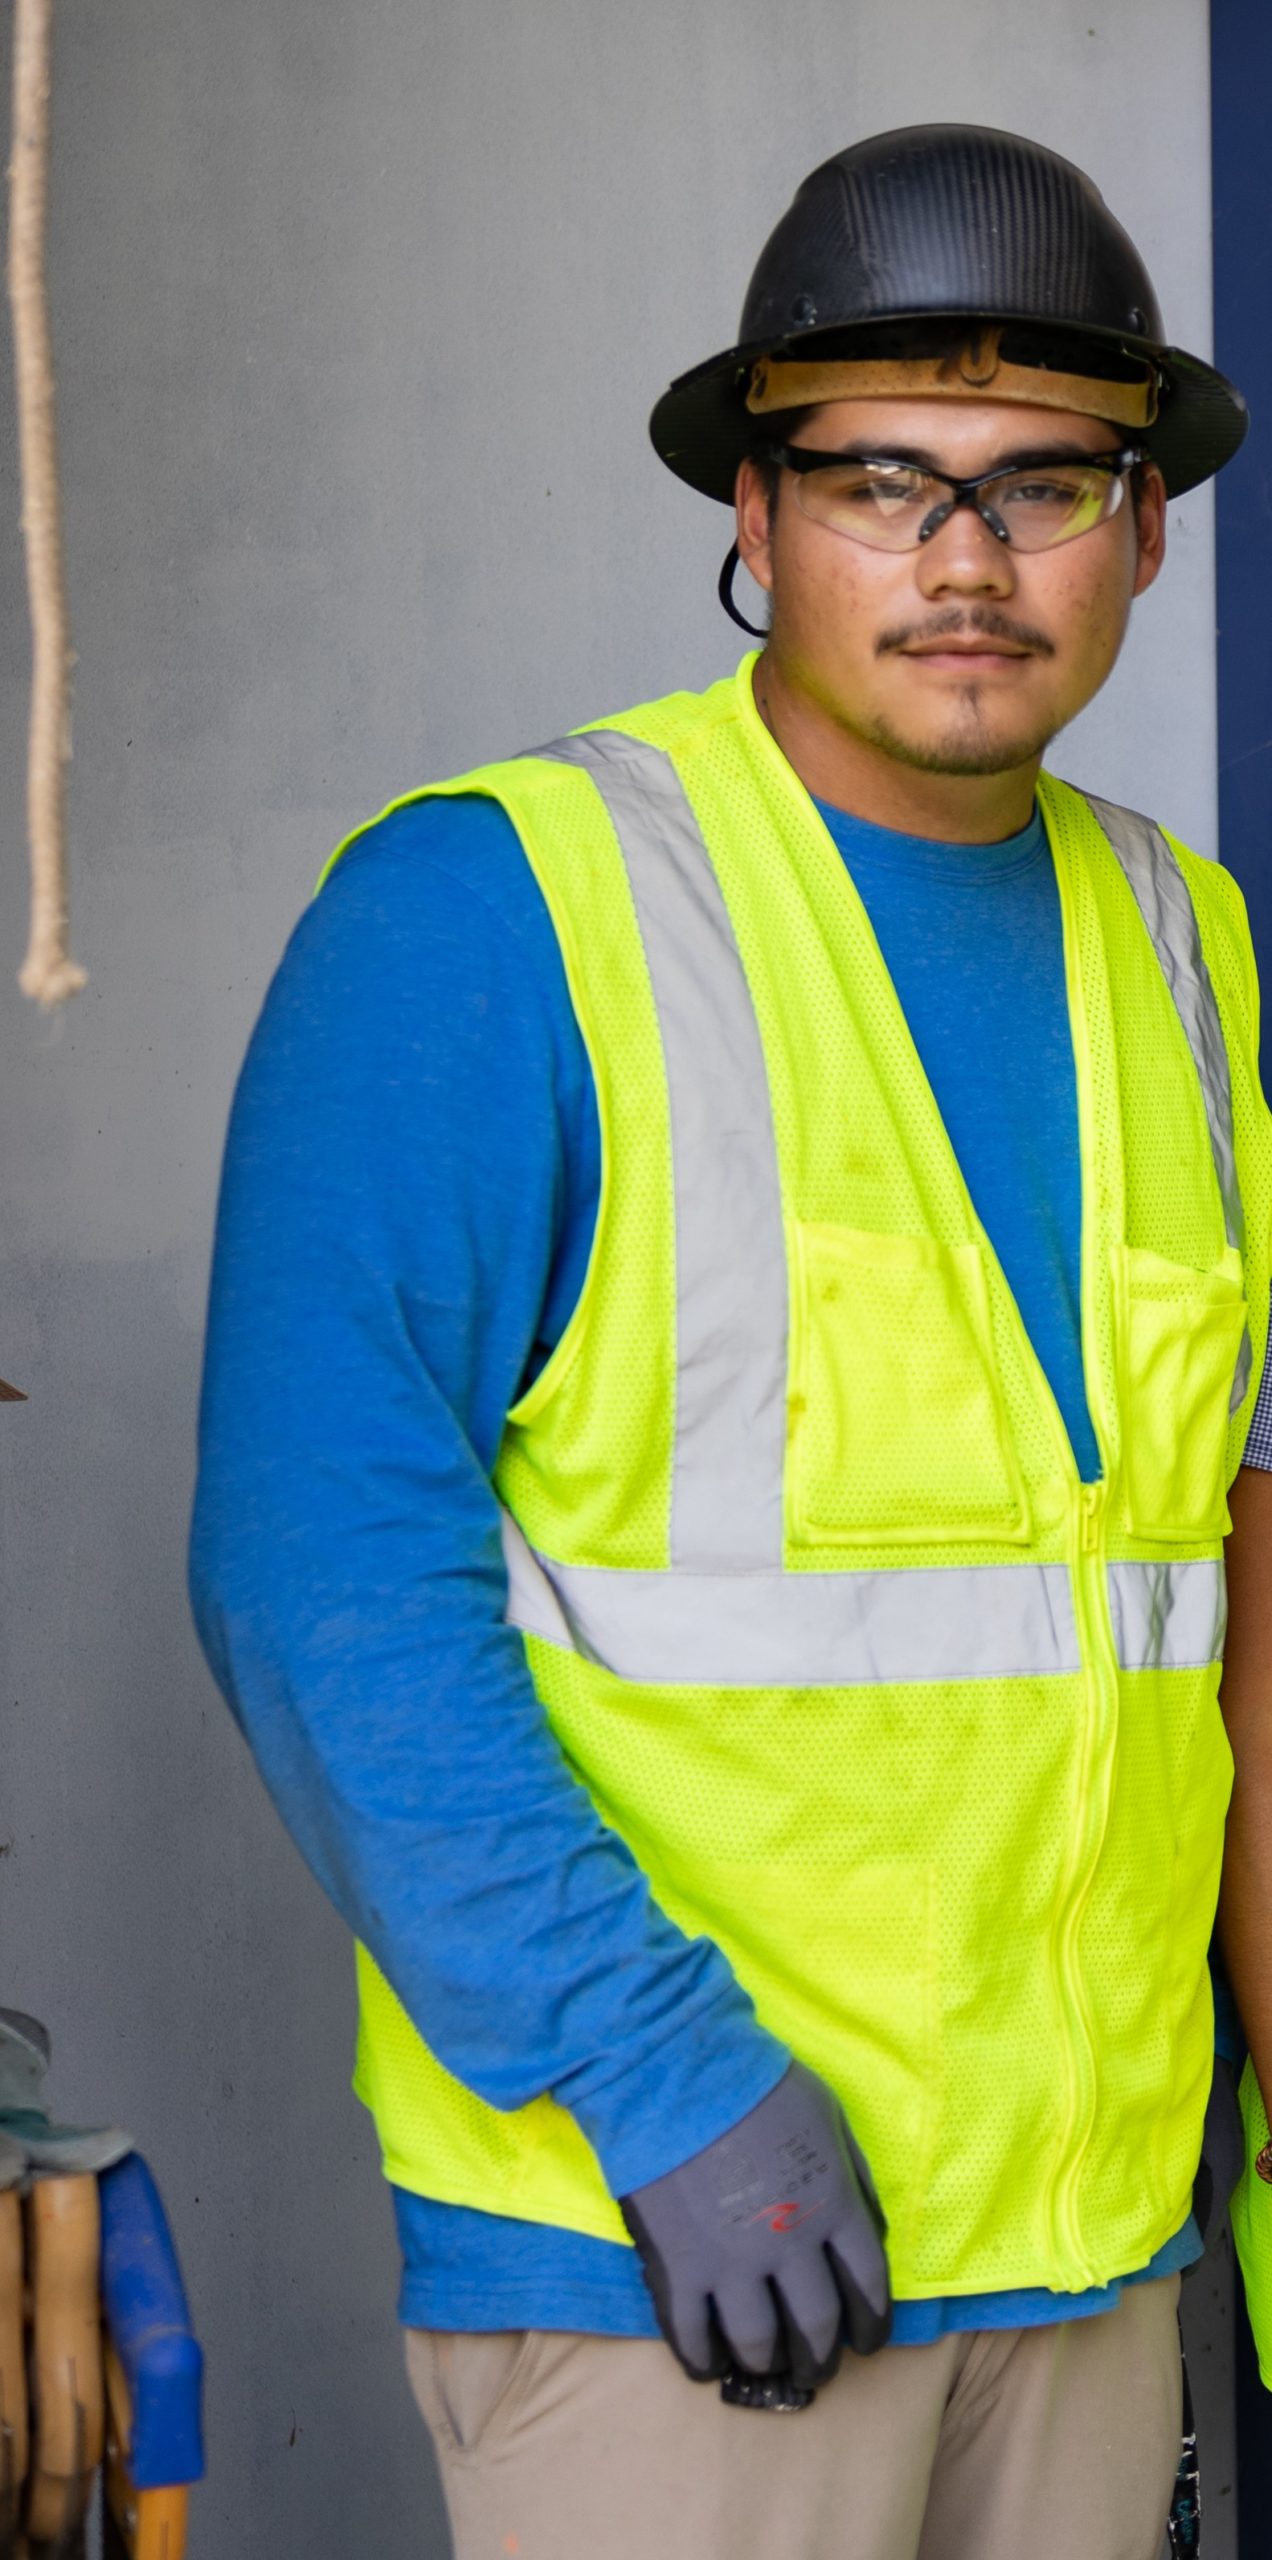 A male construction worker wearing a blue shirt and safety green vest with a brown hard hat